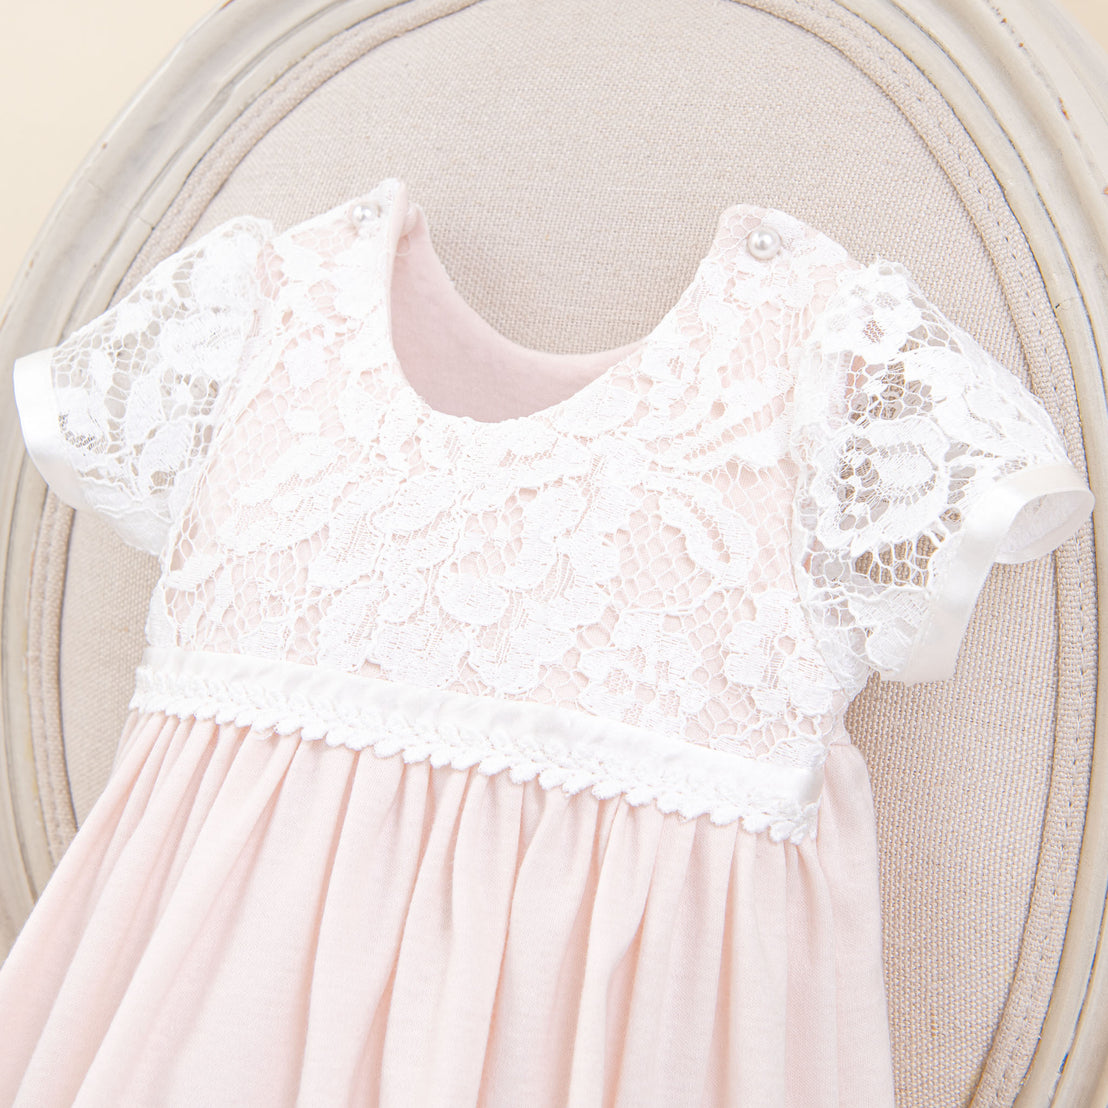 A delicate traditional Rose Newborn Layette with a white lace bodice and soft pink pleated skirt, displayed against a neutral beige circular backdrop.